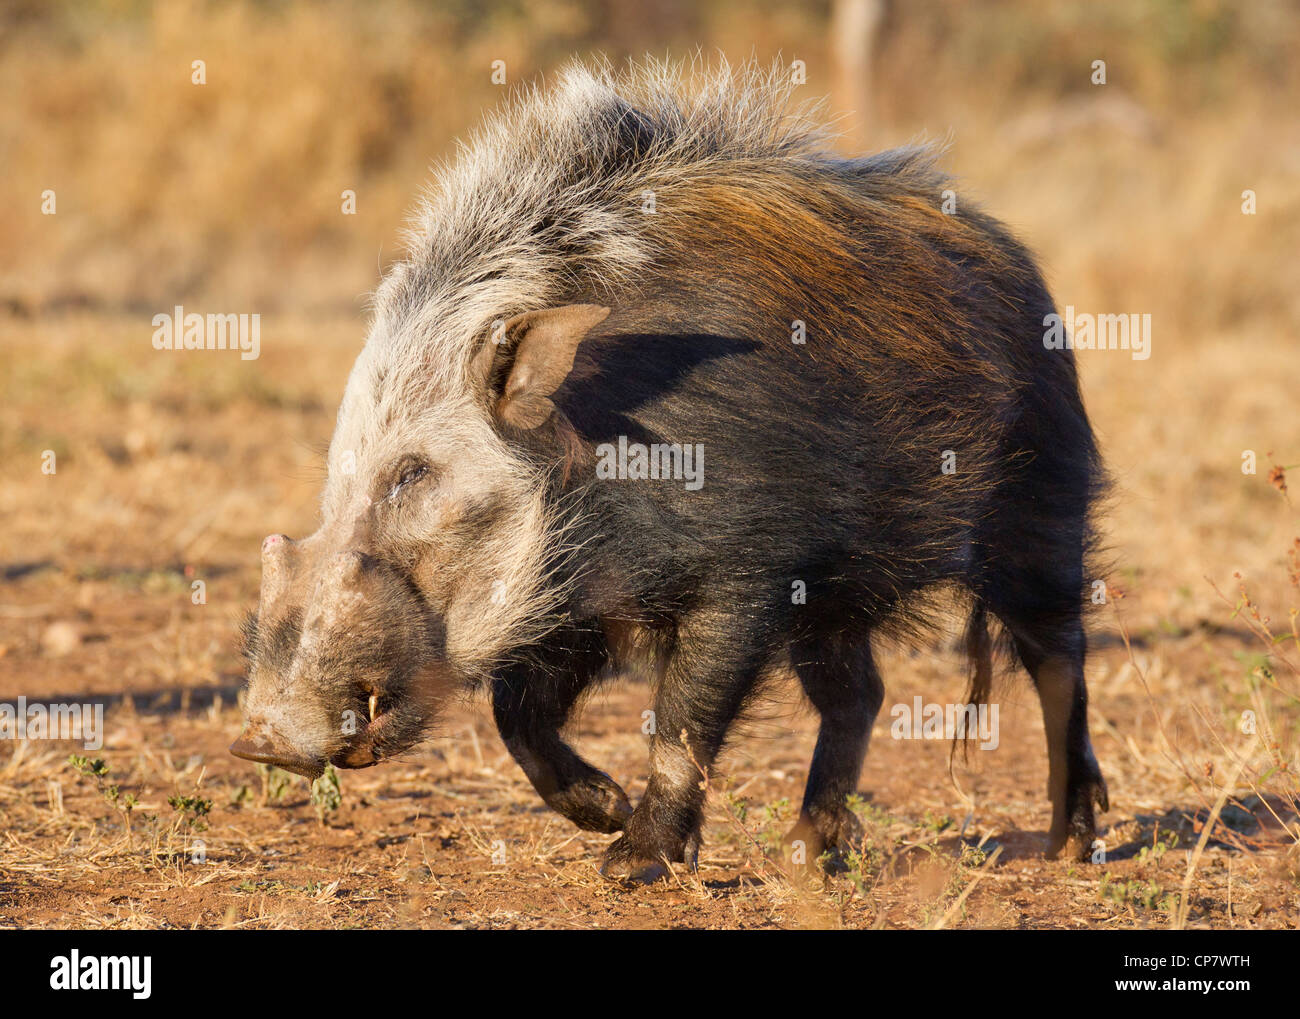 Bushpig (Potamochoerus larvatus) out during the daytime, unusual for this noctural animal, South Africa Stock Photo